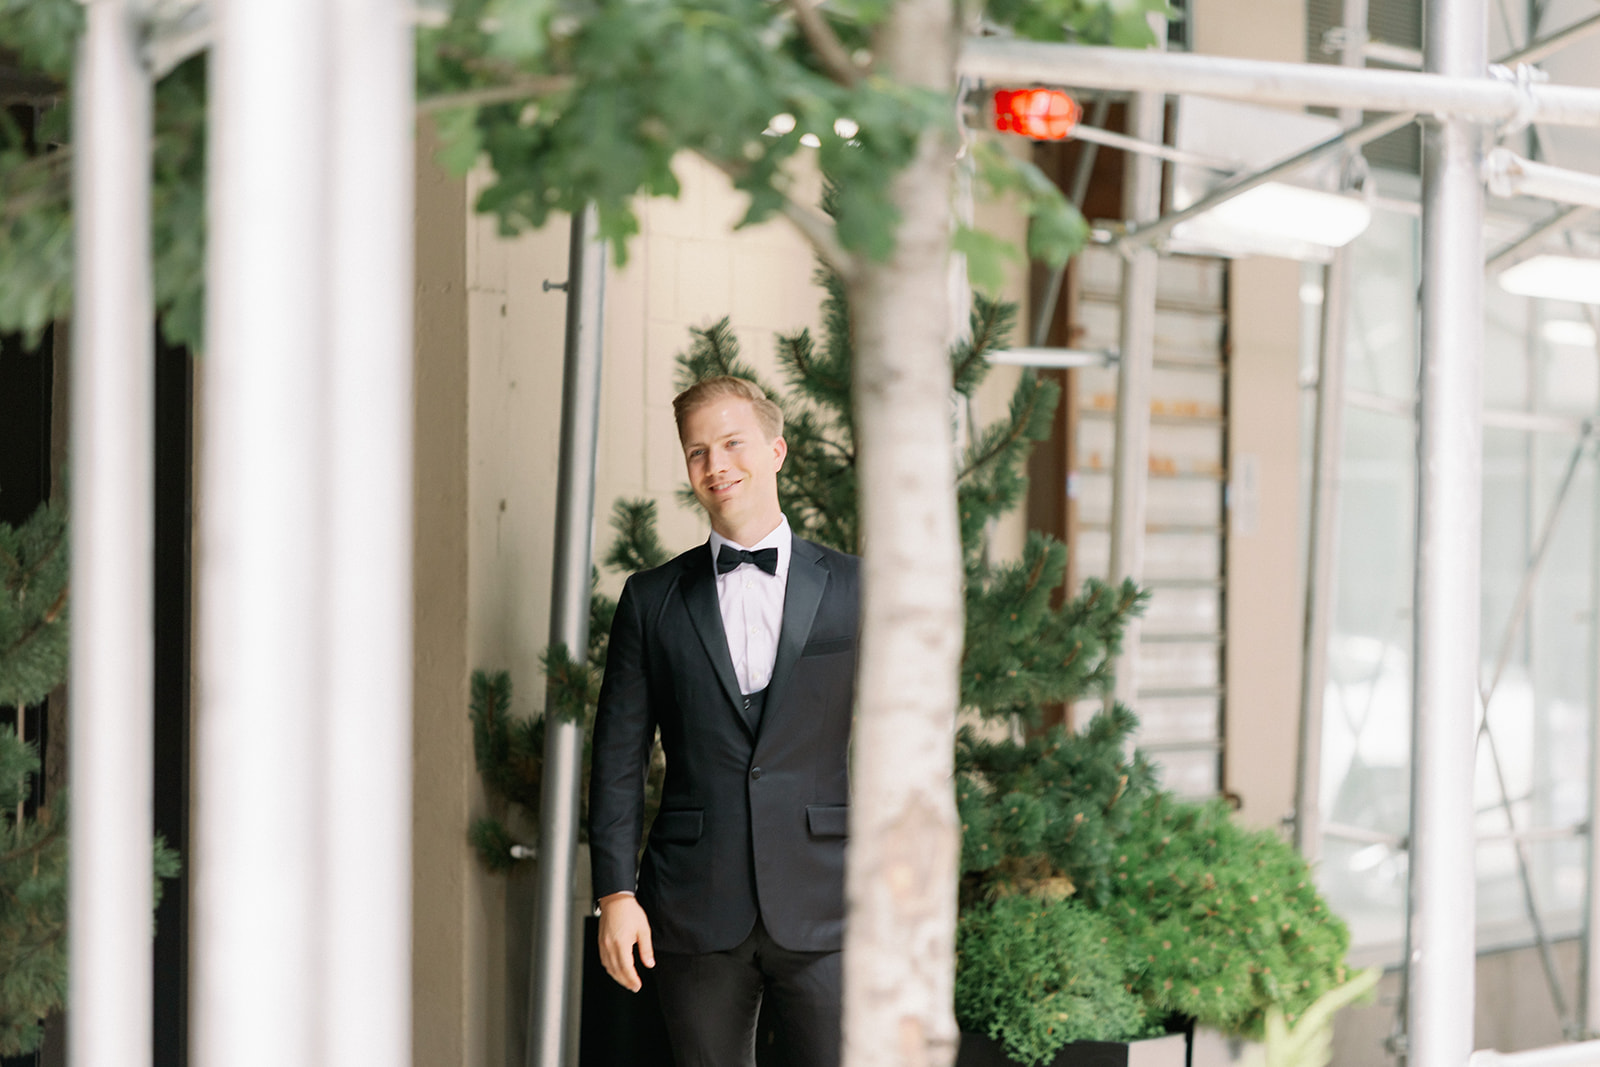 Emotional first look: Groom framed by greenery and scaffolding smiles seeing his bride at Tribeca Rooftop, a stunning New York wedding moment.